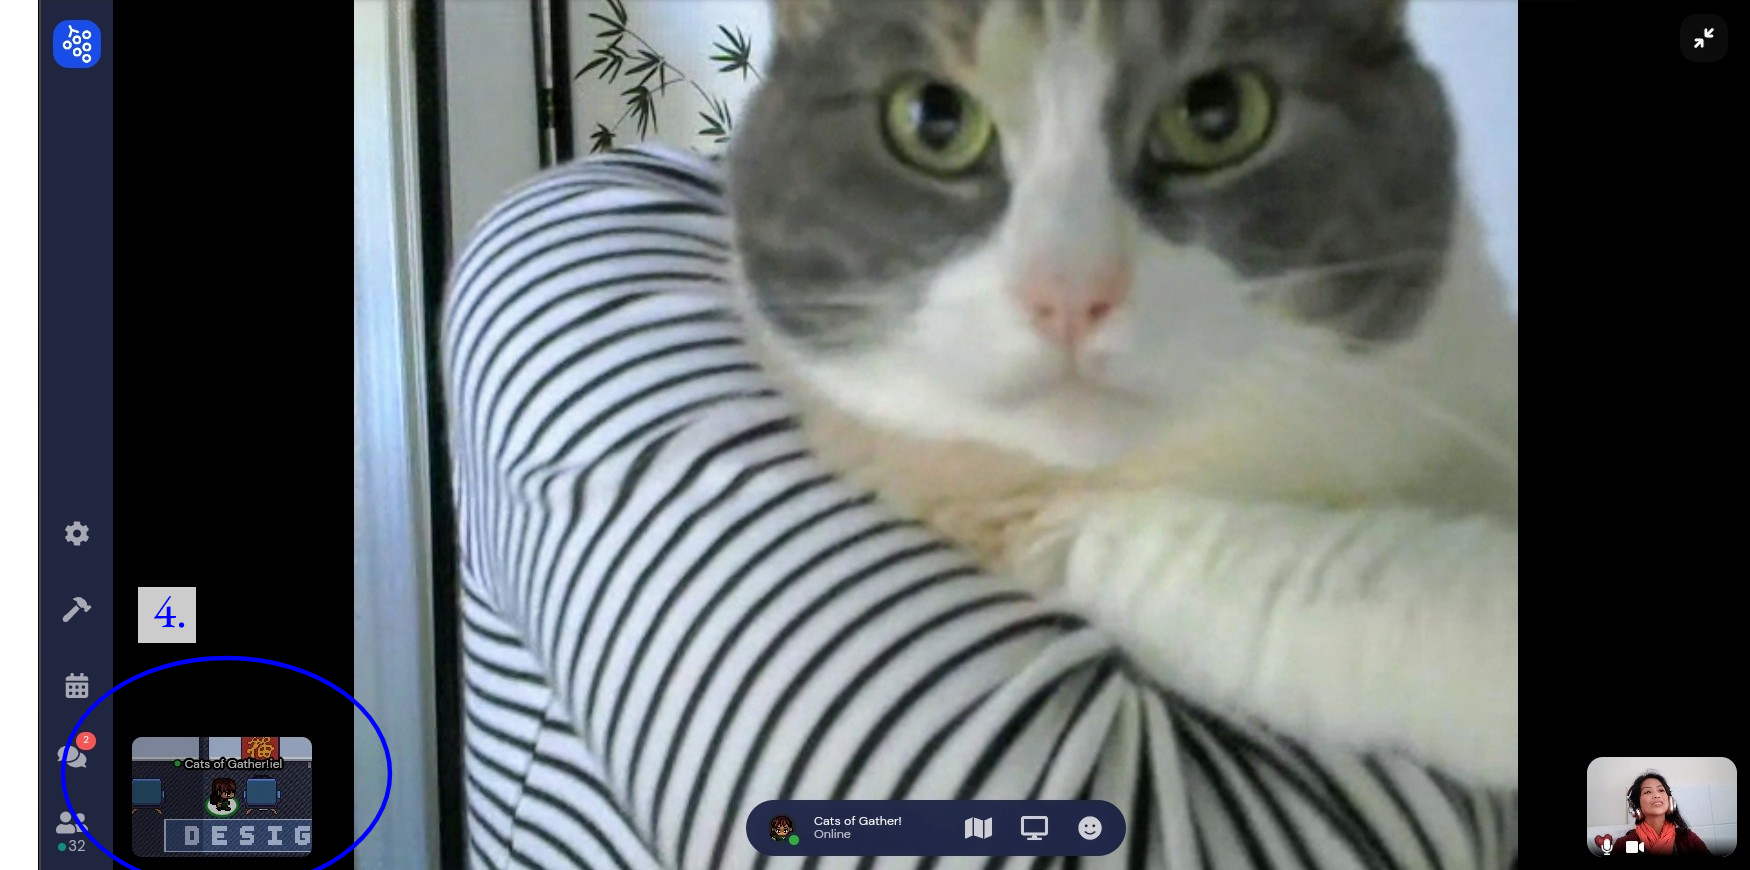 Image with a full-screened video call showing a circle around the in-space preview with the label "#4"